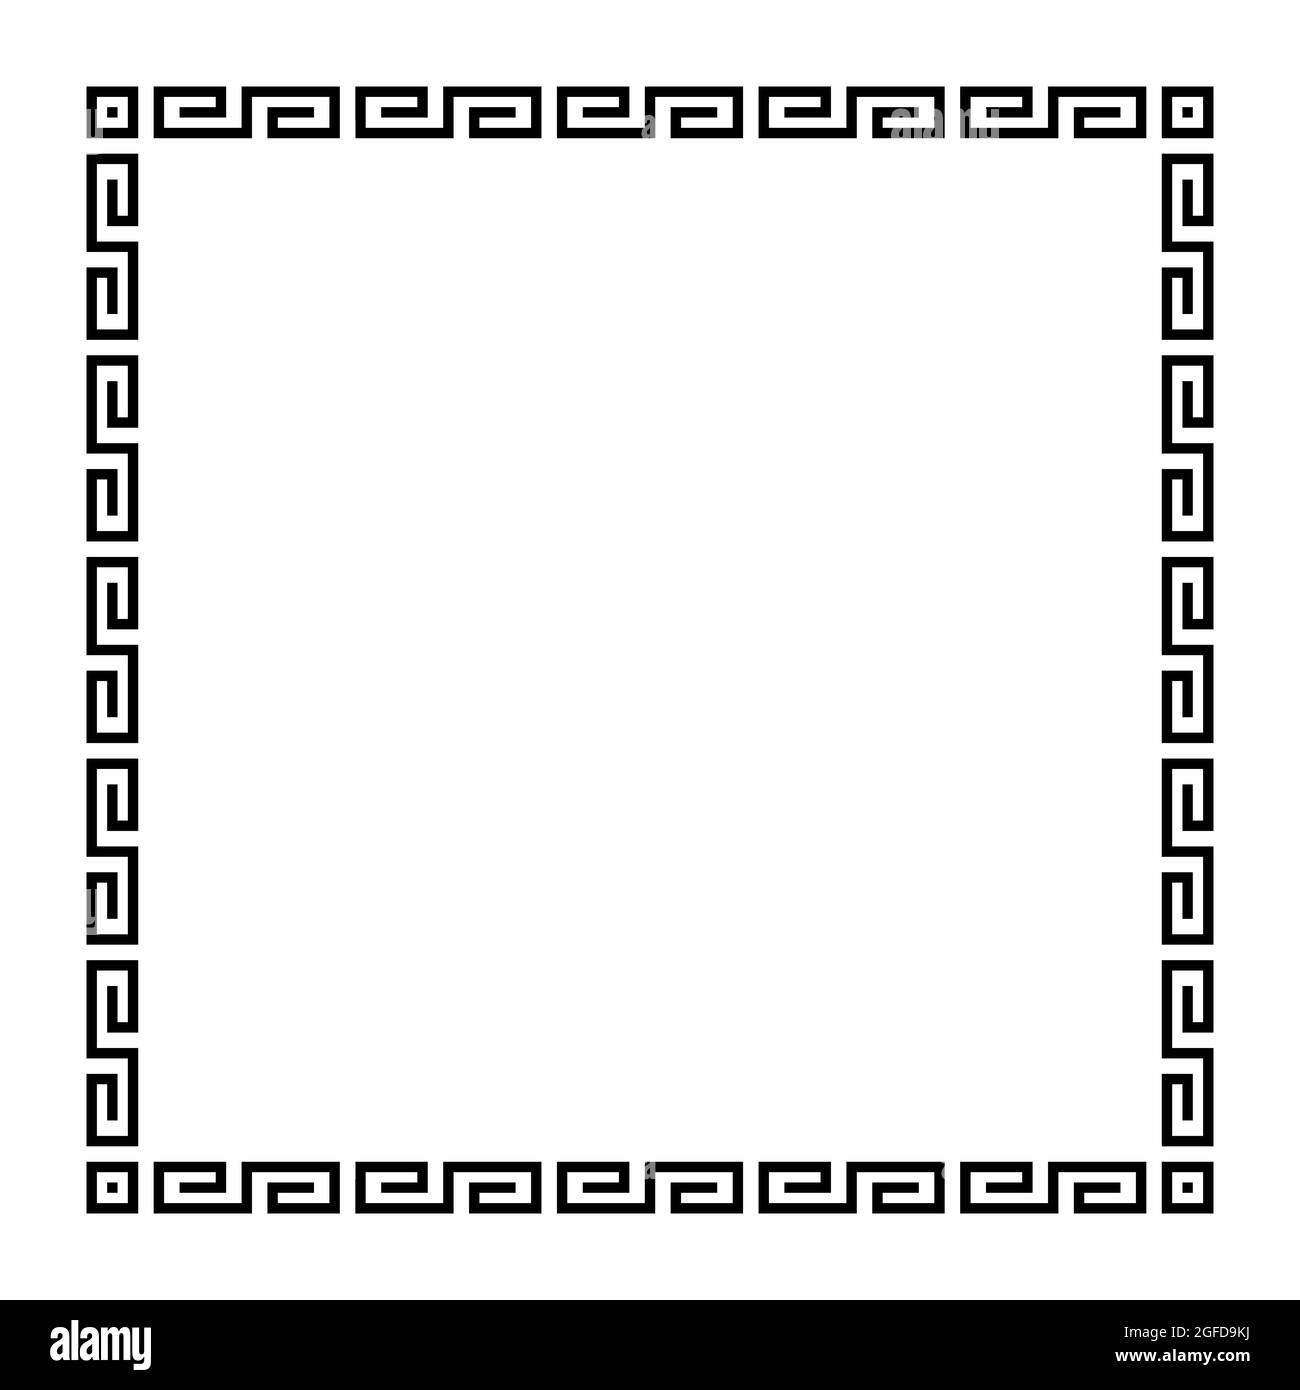 https://c8.alamy.com/comp/2GFD9KJ/meander-square-with-simple-meander-pattern-square-frame-and-decorative-border-made-of-angular-spirals-shaped-into-a-seamless-motif-greek-key-2GFD9KJ.jpg